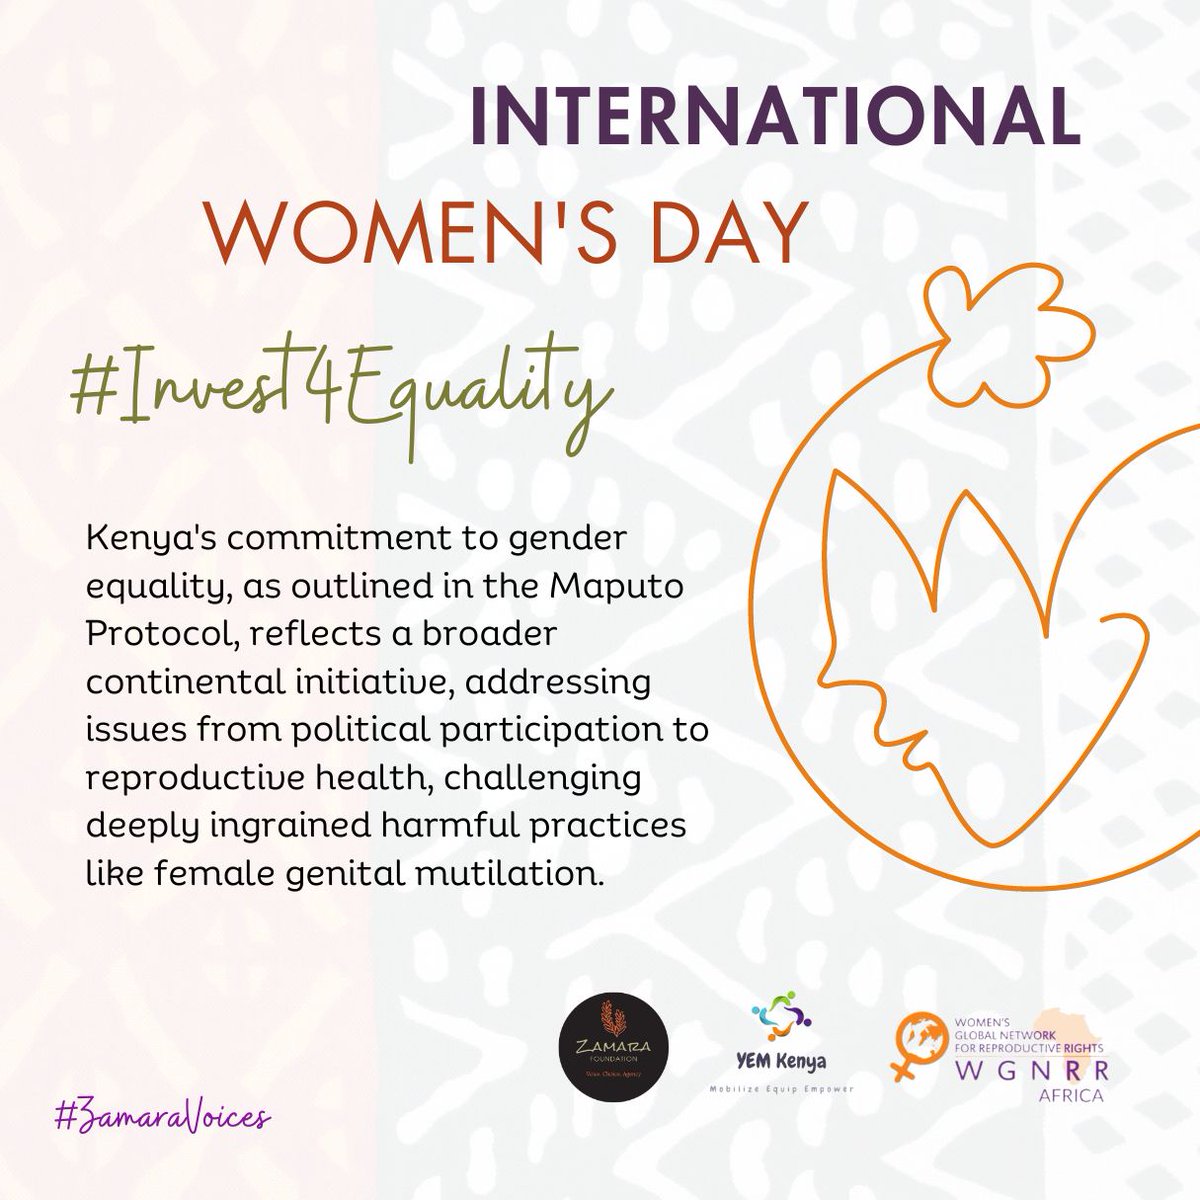 Structural biases, violence, and gender gaps constrain women from enjoying their rights and achieving their full potential. #Invest4Equality #ZamaraVoices @Zamara_fdn @YEMKenya @wgnrr_africa